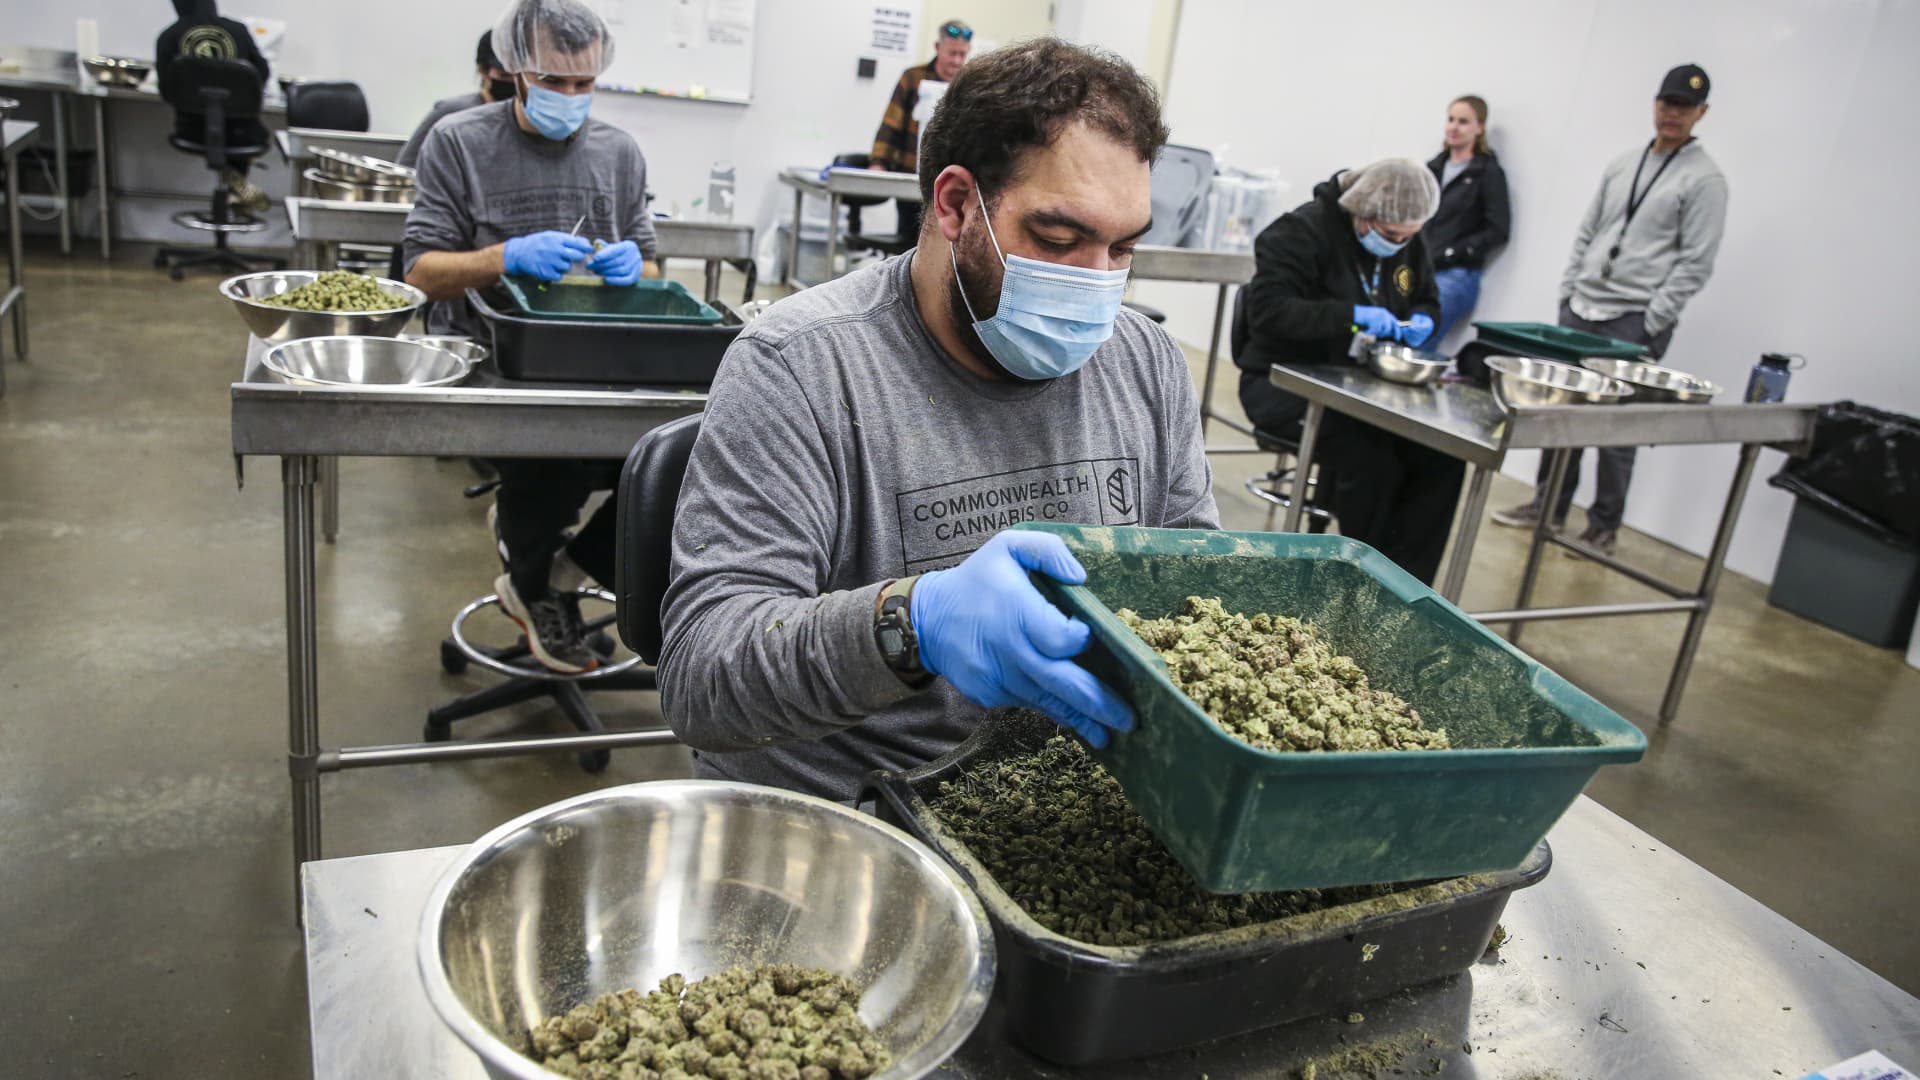 HHS calls for easing marijuana restrictions